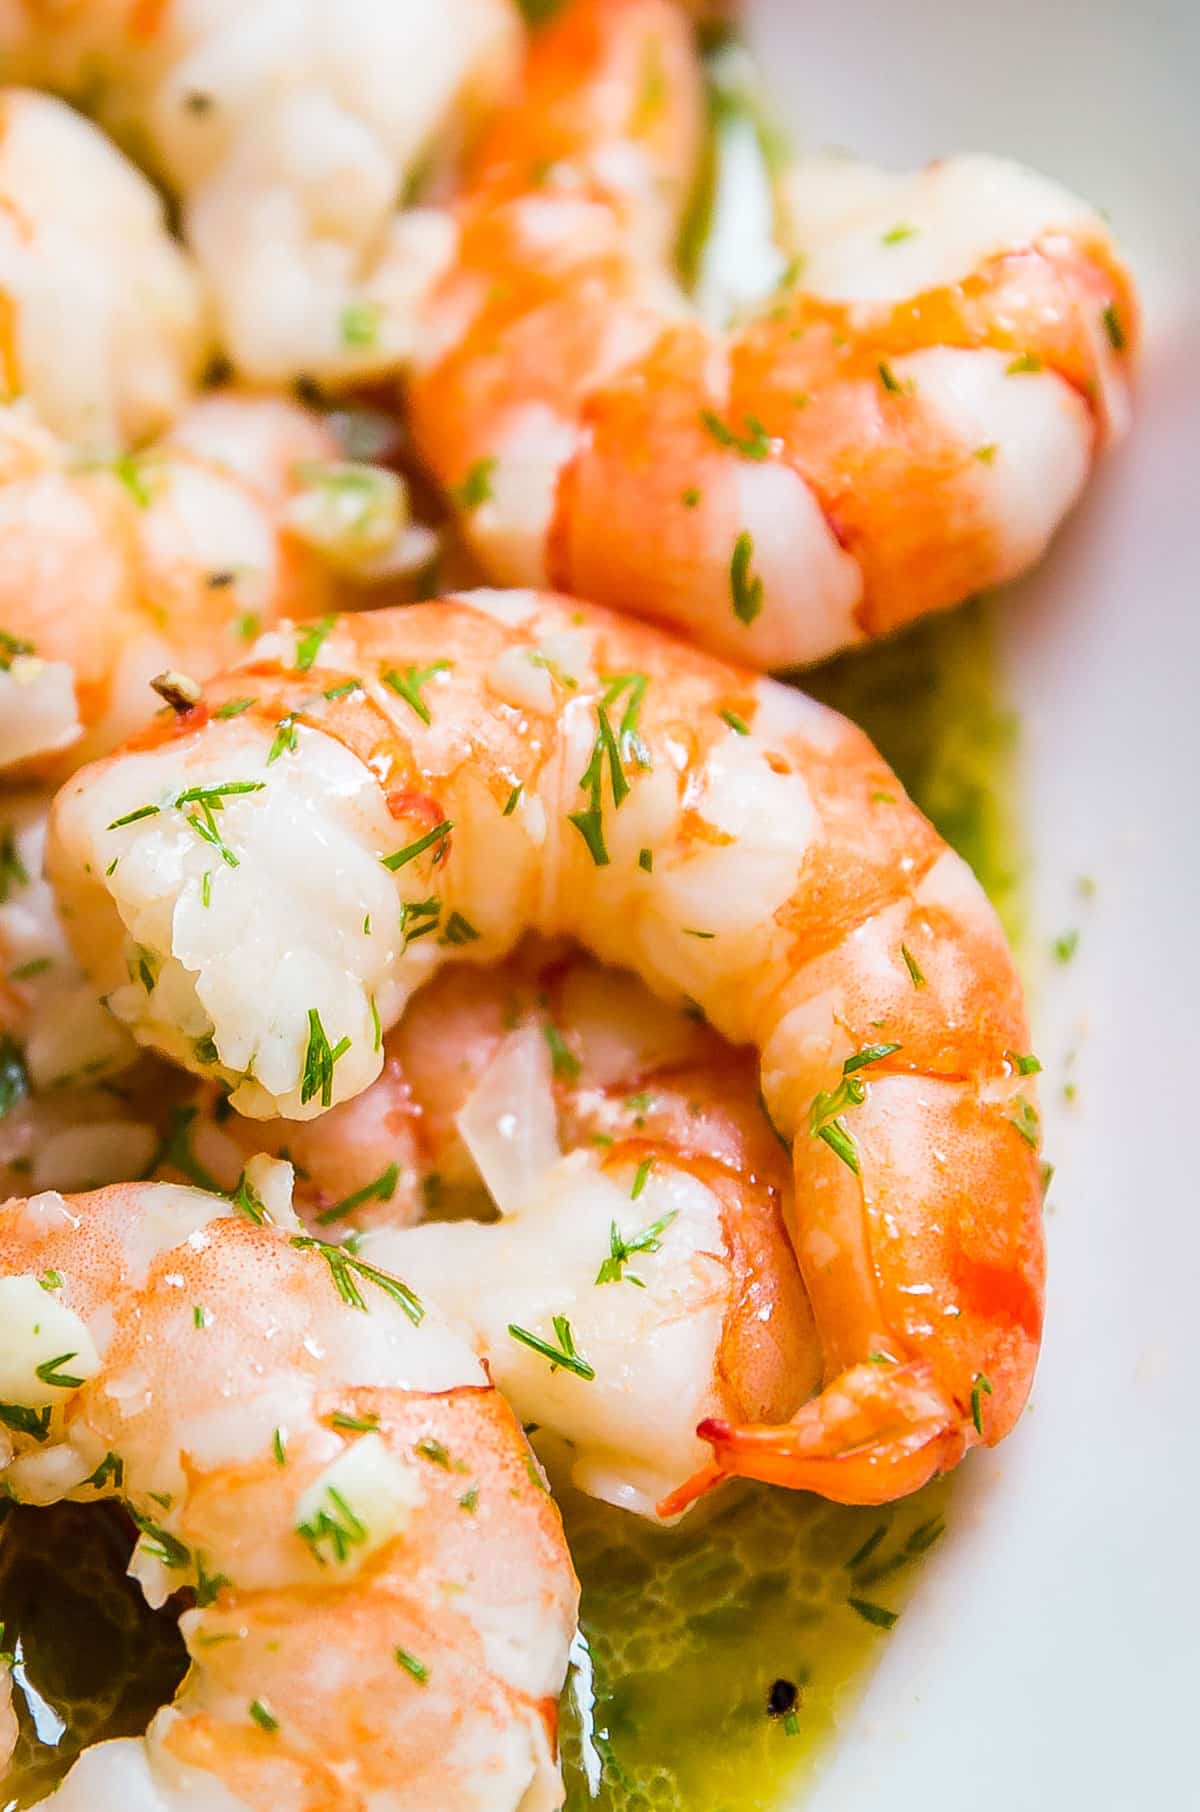 A close up of a garlic shrimp in a white bowl with other shrimp and butter dill sauce.